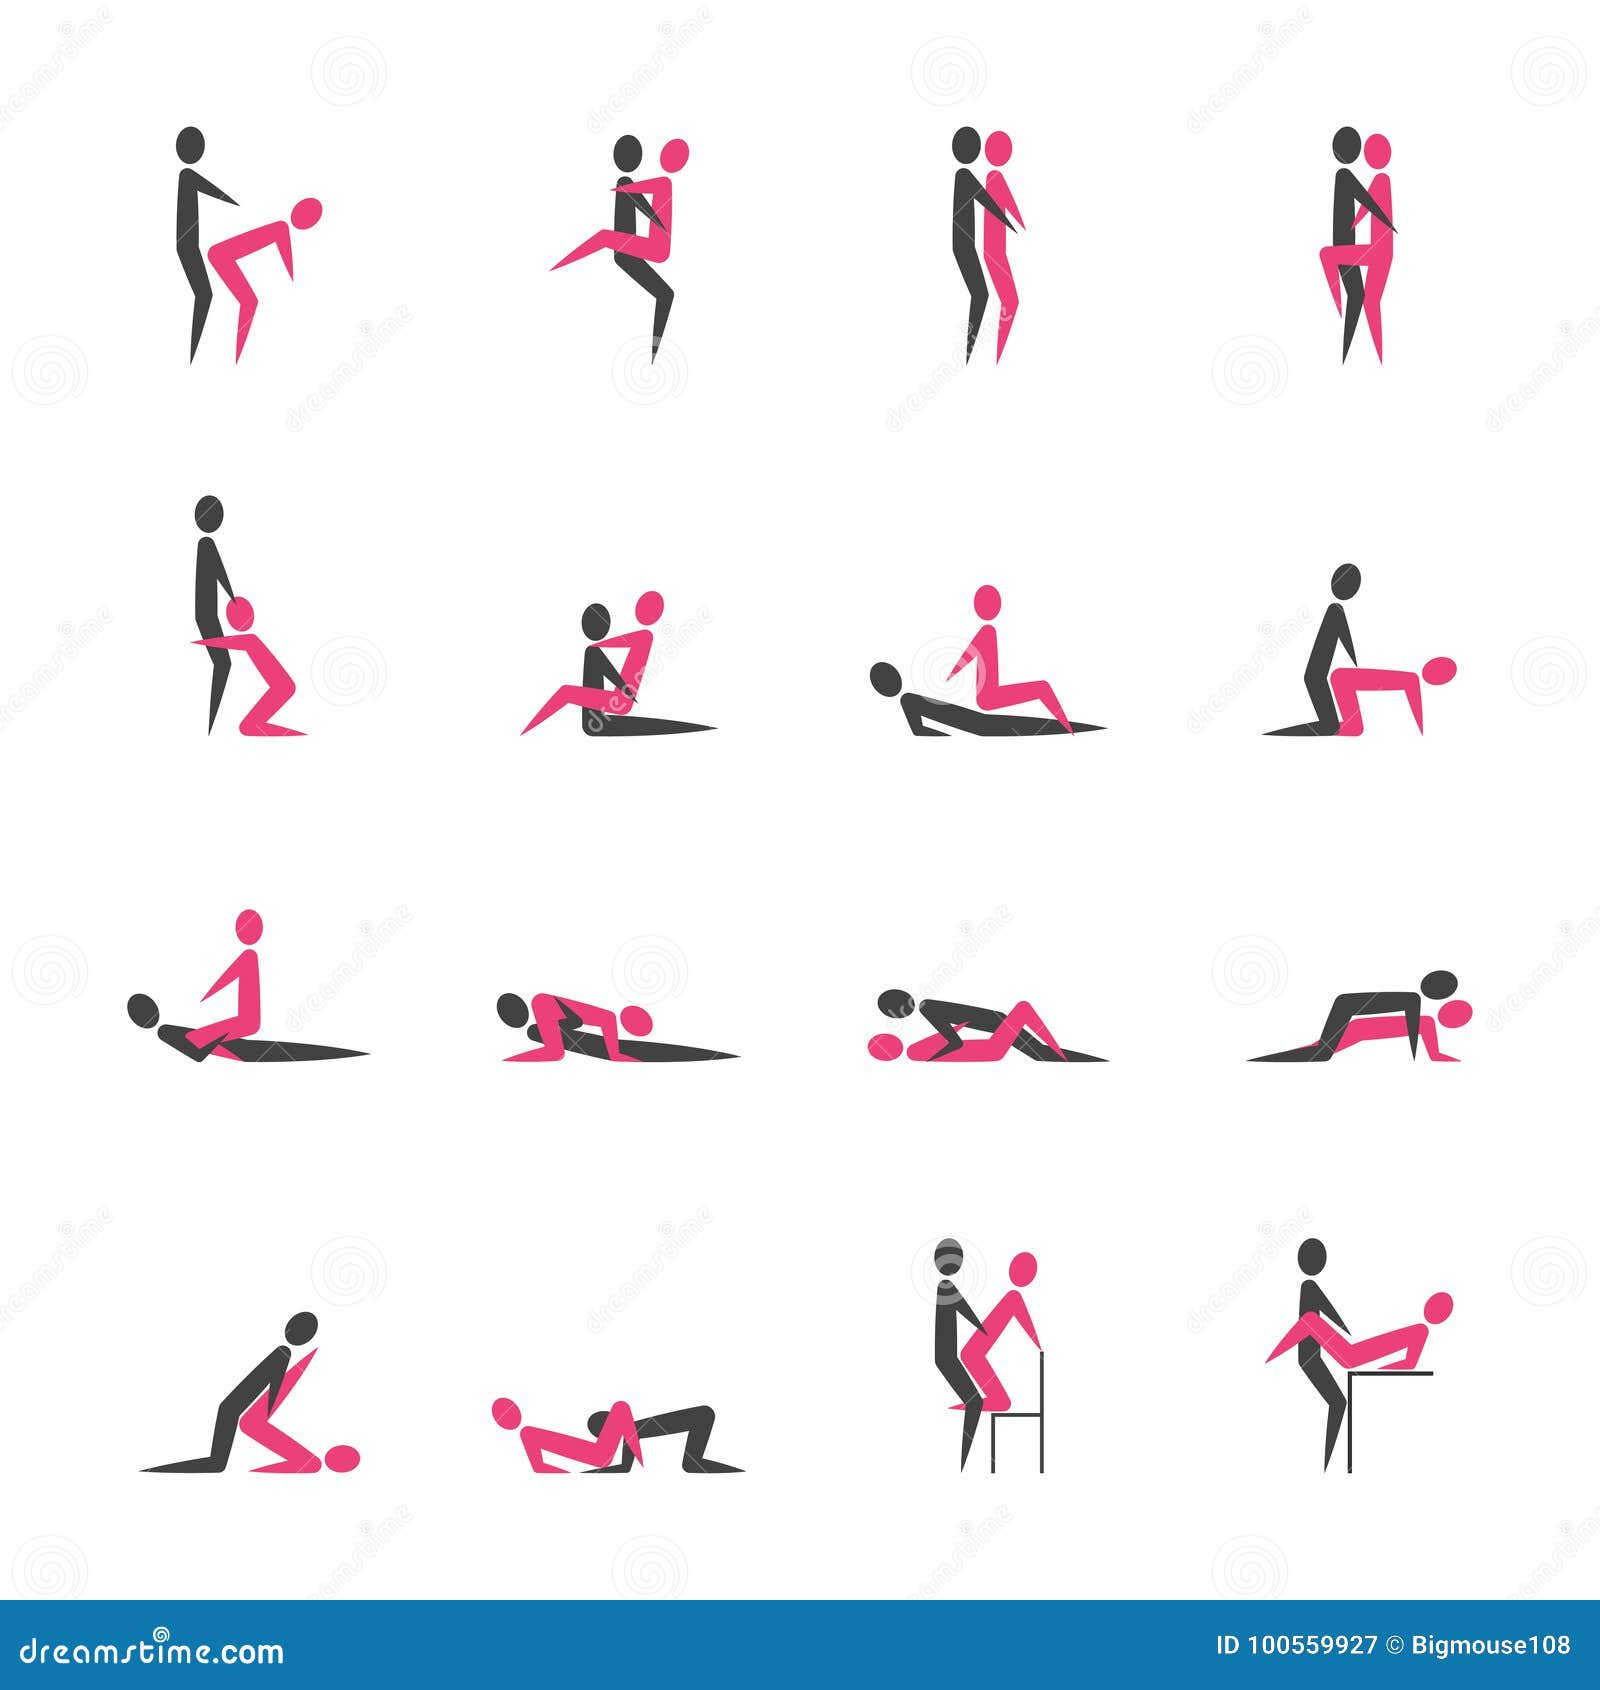 Sexual Intercourse Positions Drawings